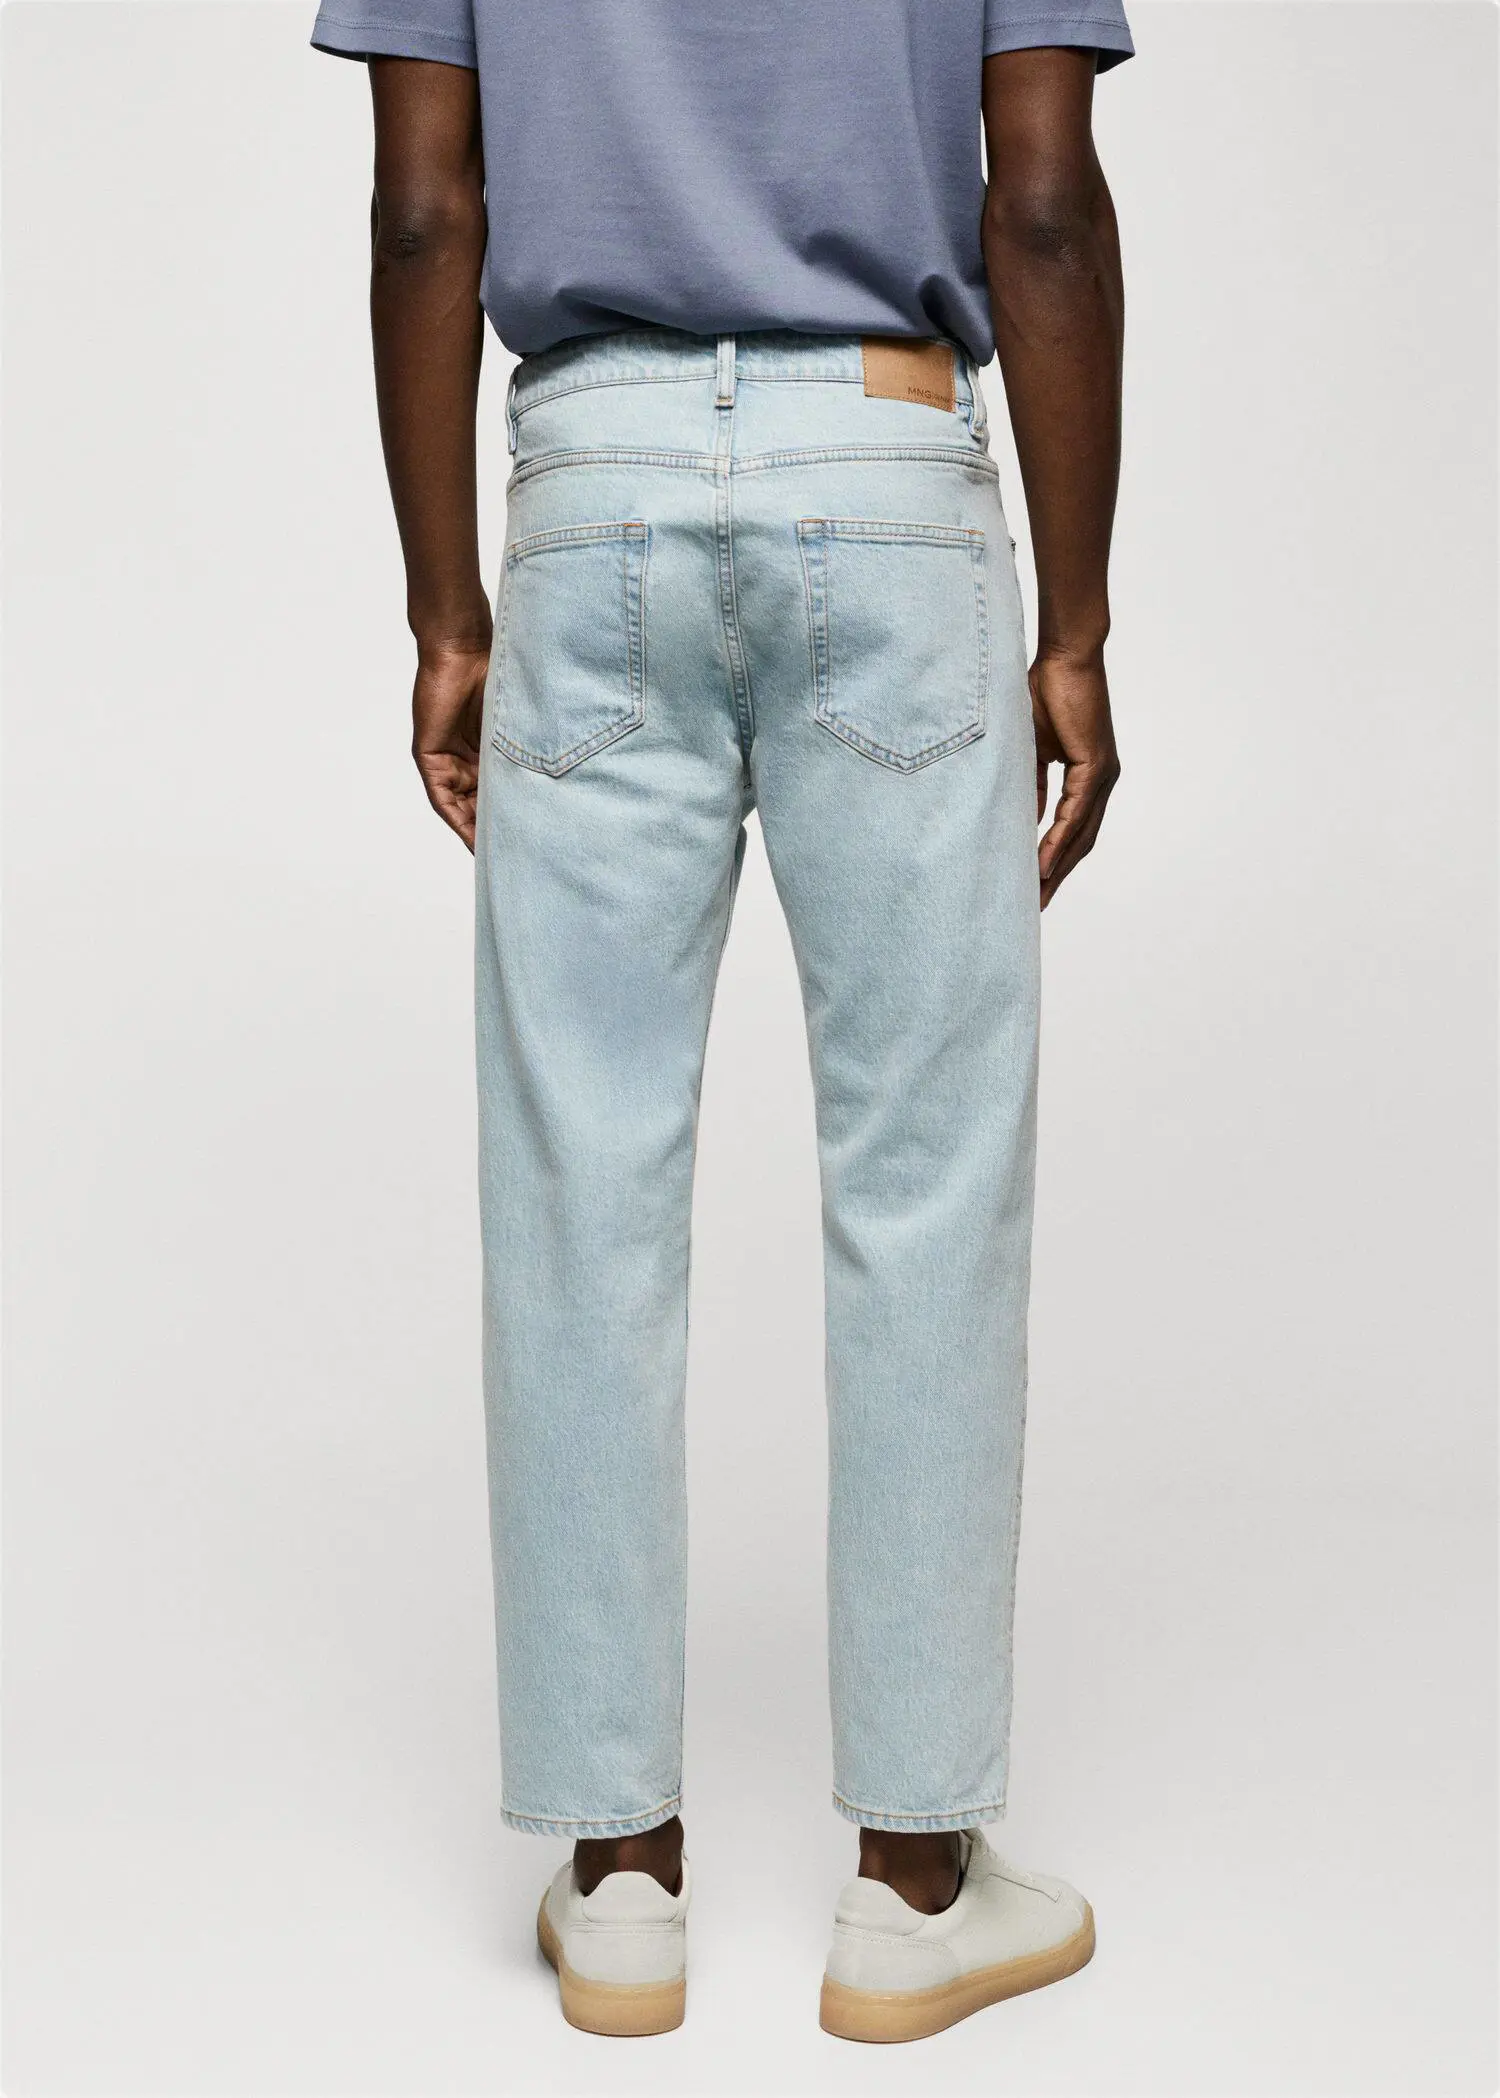 Mango Ben tapered cropped jeans. a person wearing light blue jeans and a white shirt. 